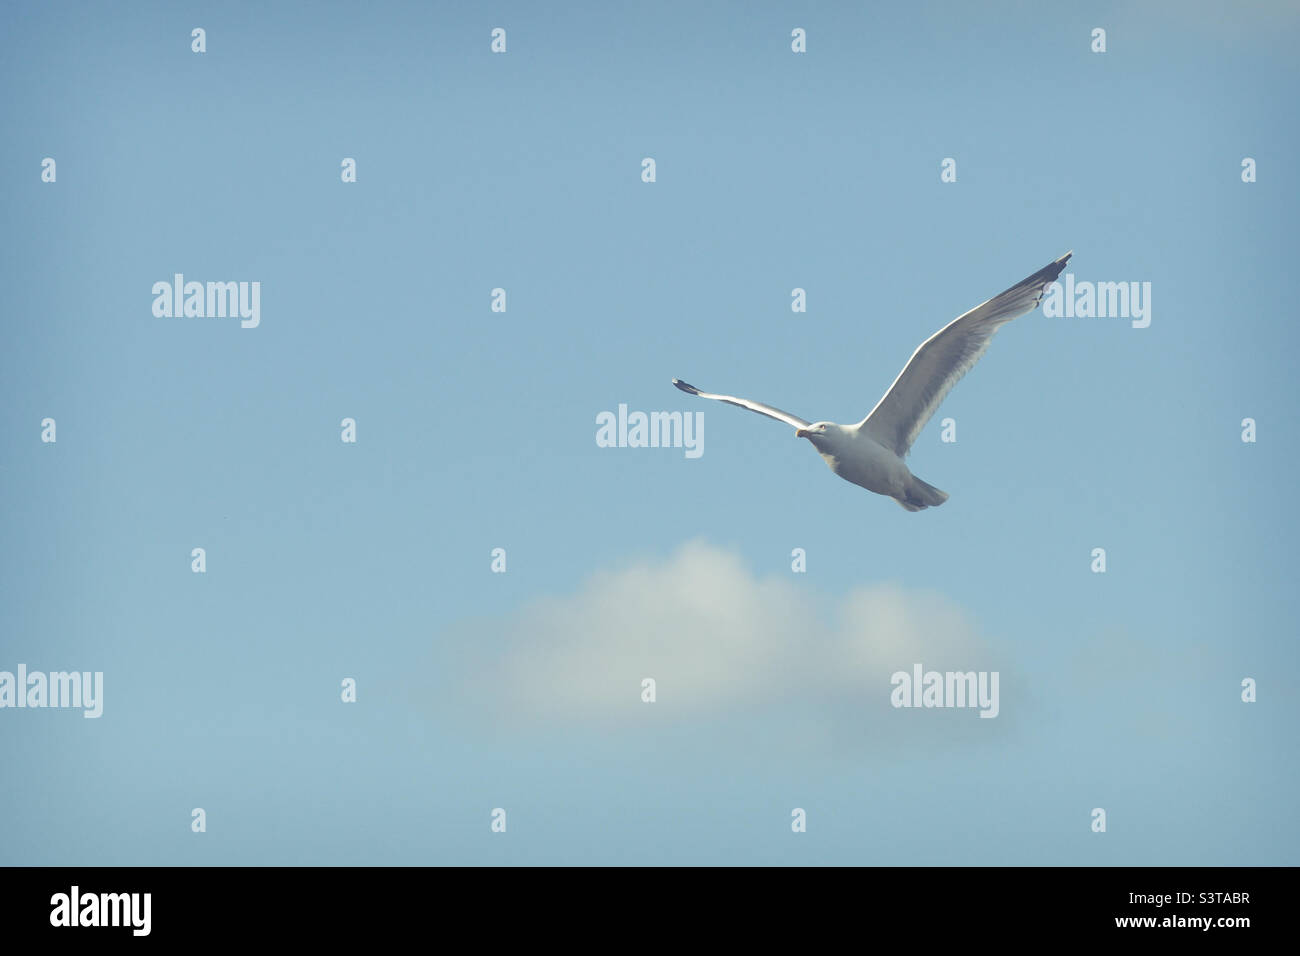 Seabird or gull soaring high with large wingspan and light and airy blue sky with copy space Stock Photo